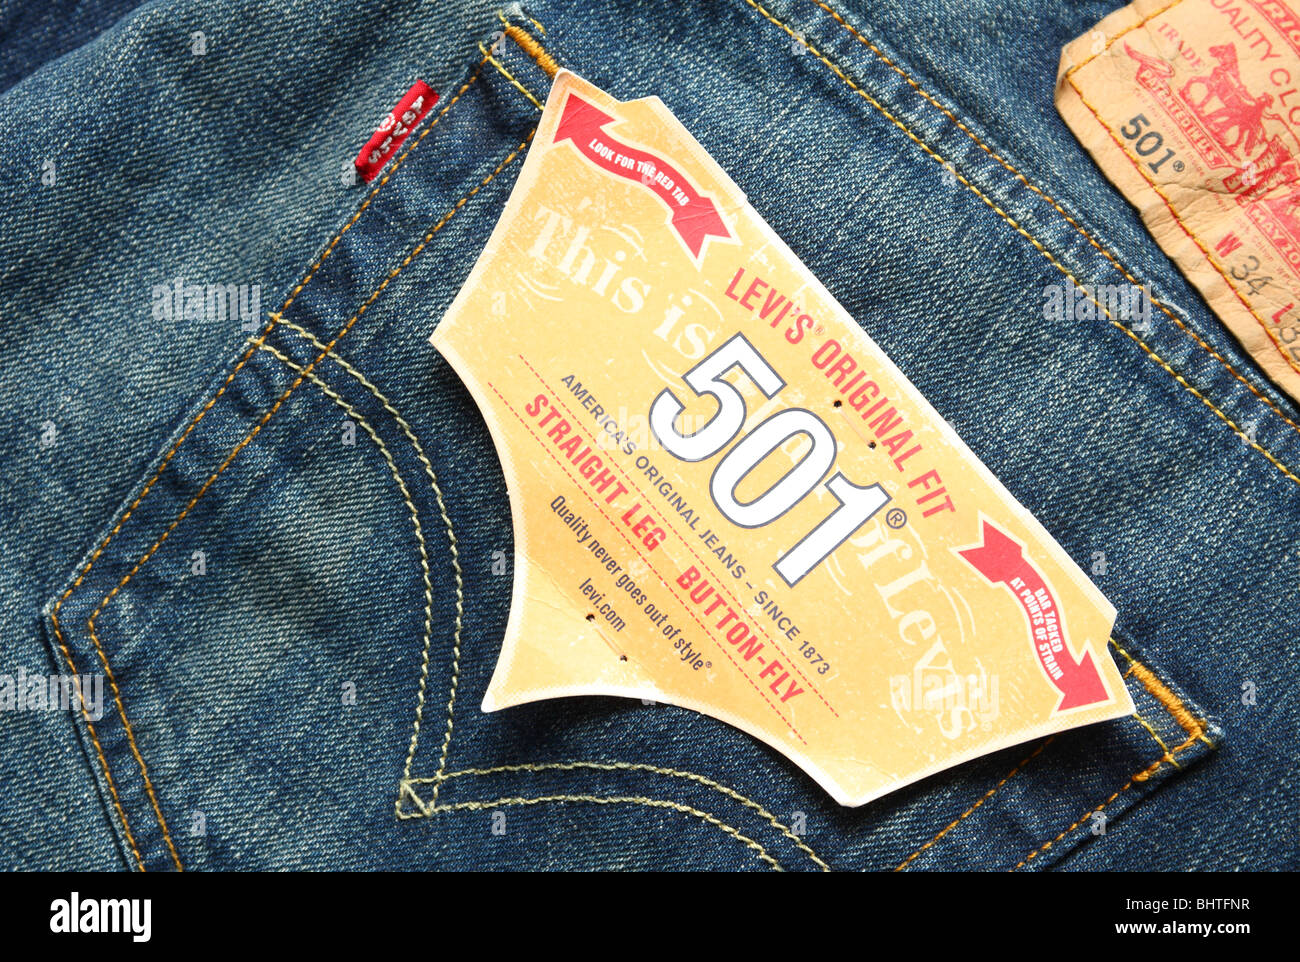 Levi's jeans shop hi-res stock photography and images - Alamy